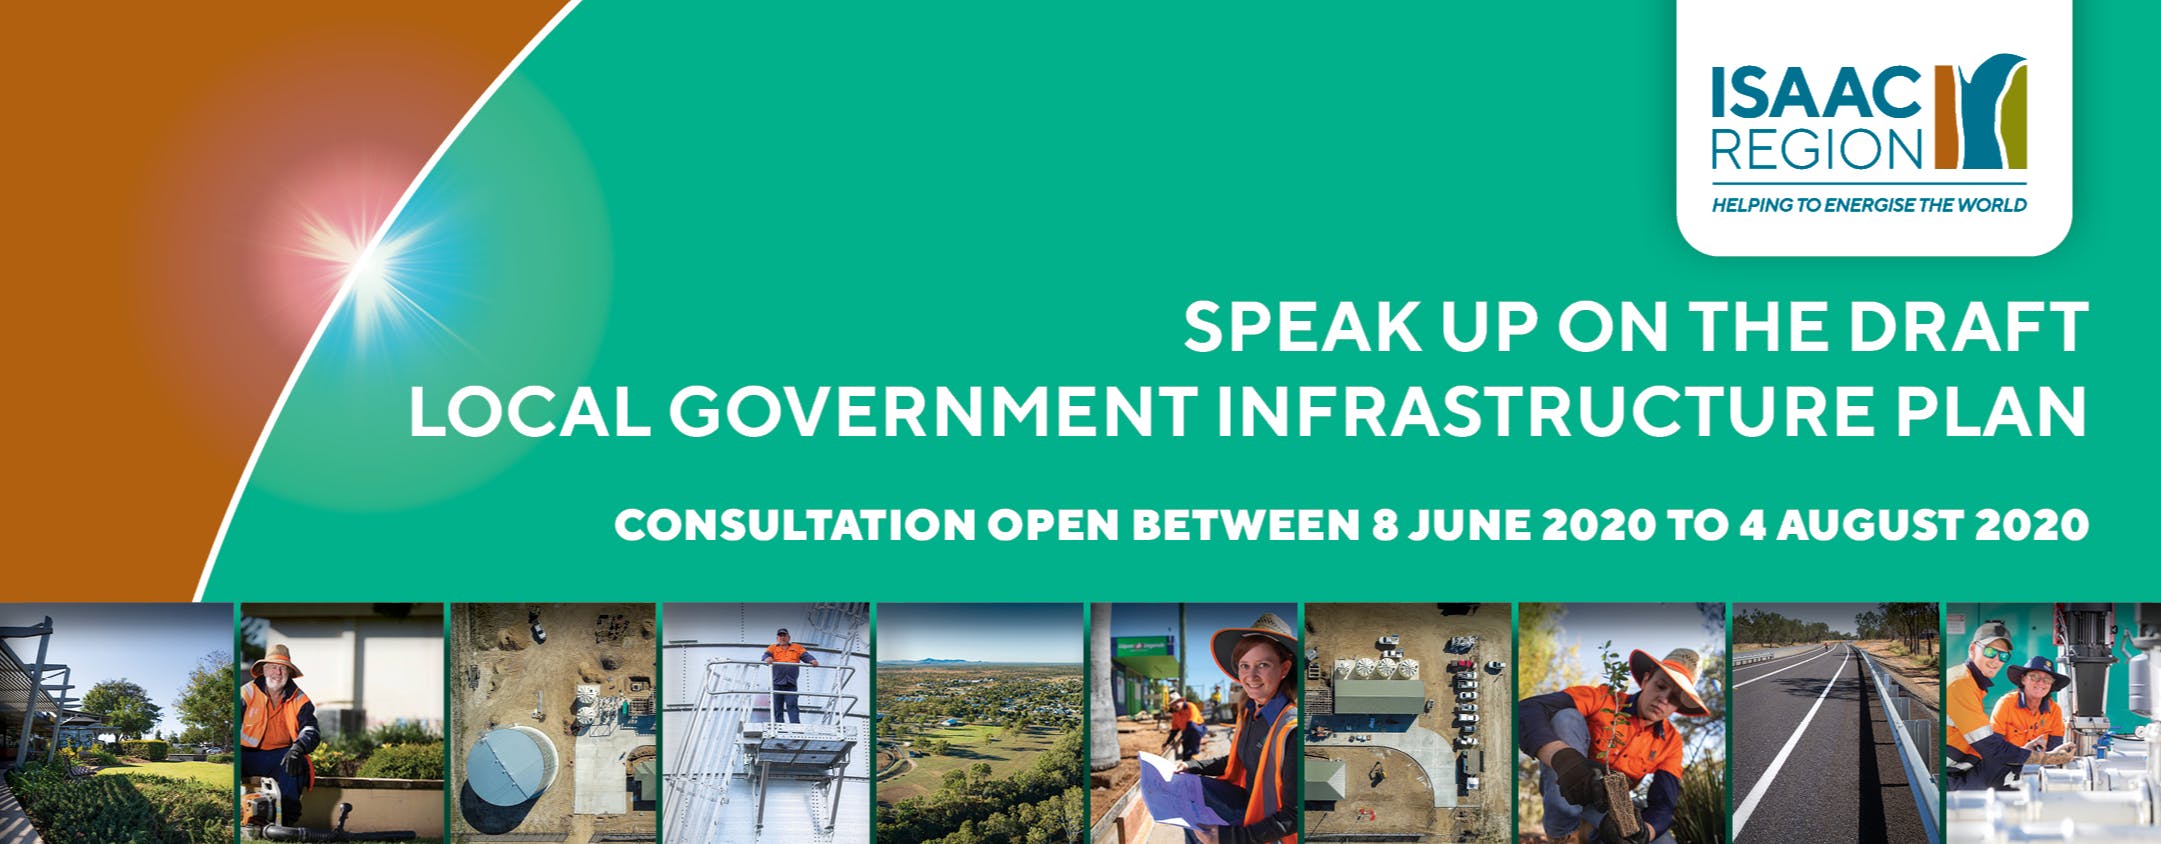 Speak Up on the Draft Local Government Infrastructure Plan